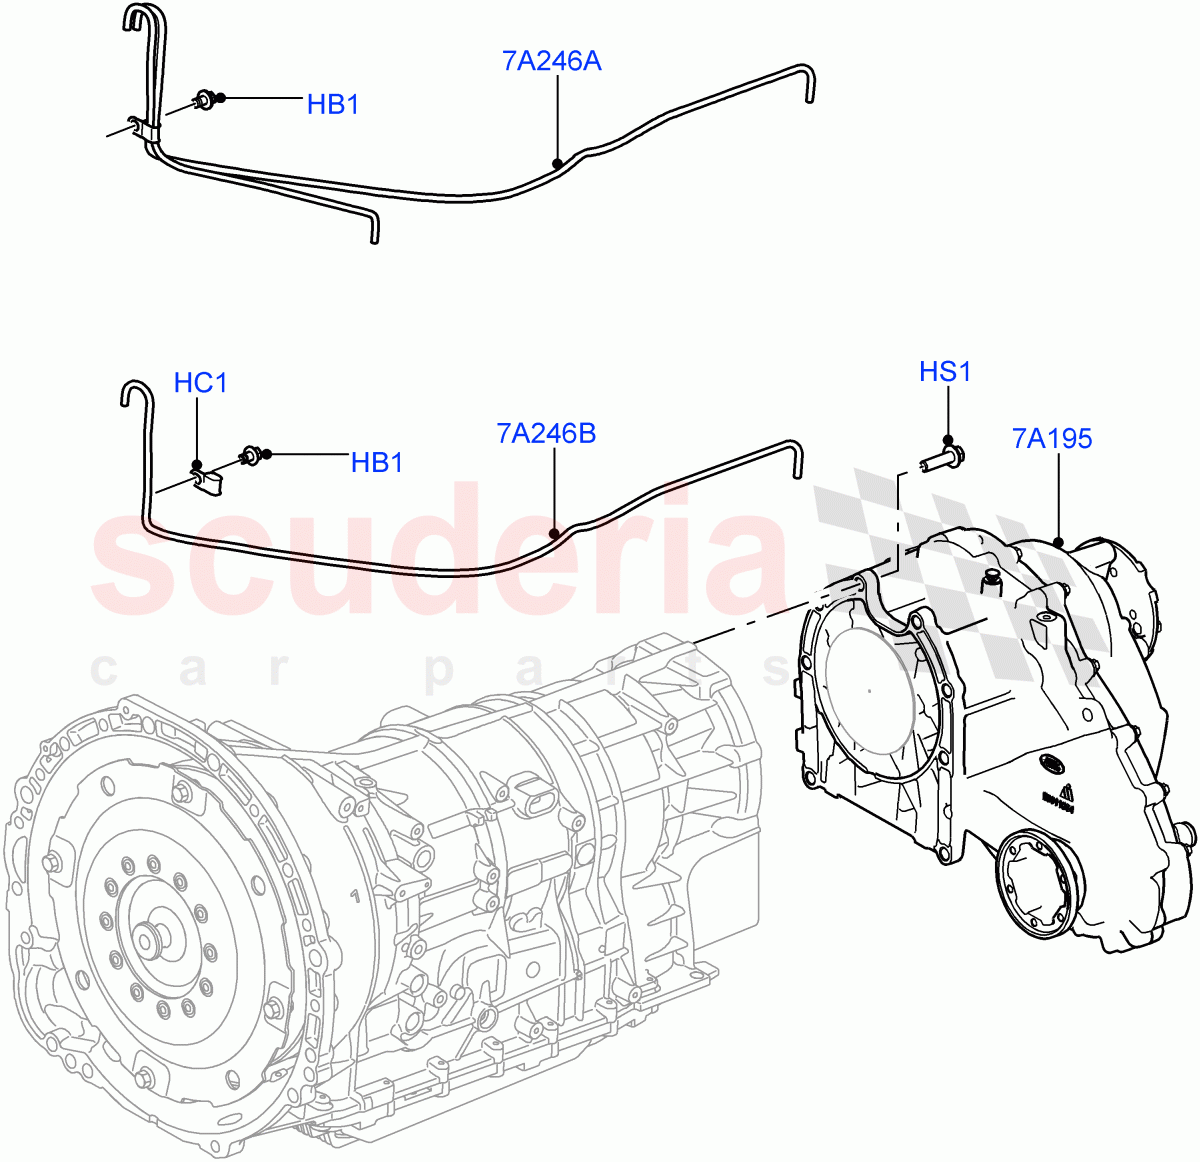 Transfer Drive Case(8 Speed Auto Trans ZF 8HP70 4WD,With 1 Speed Transfer Case,8 Speed Auto Trans ZF 8HP45)((V)FROMEA000001,(V)TOGA999999) of Land Rover Land Rover Discovery 4 (2010-2016) [5.0 OHC SGDI NA V8 Petrol]